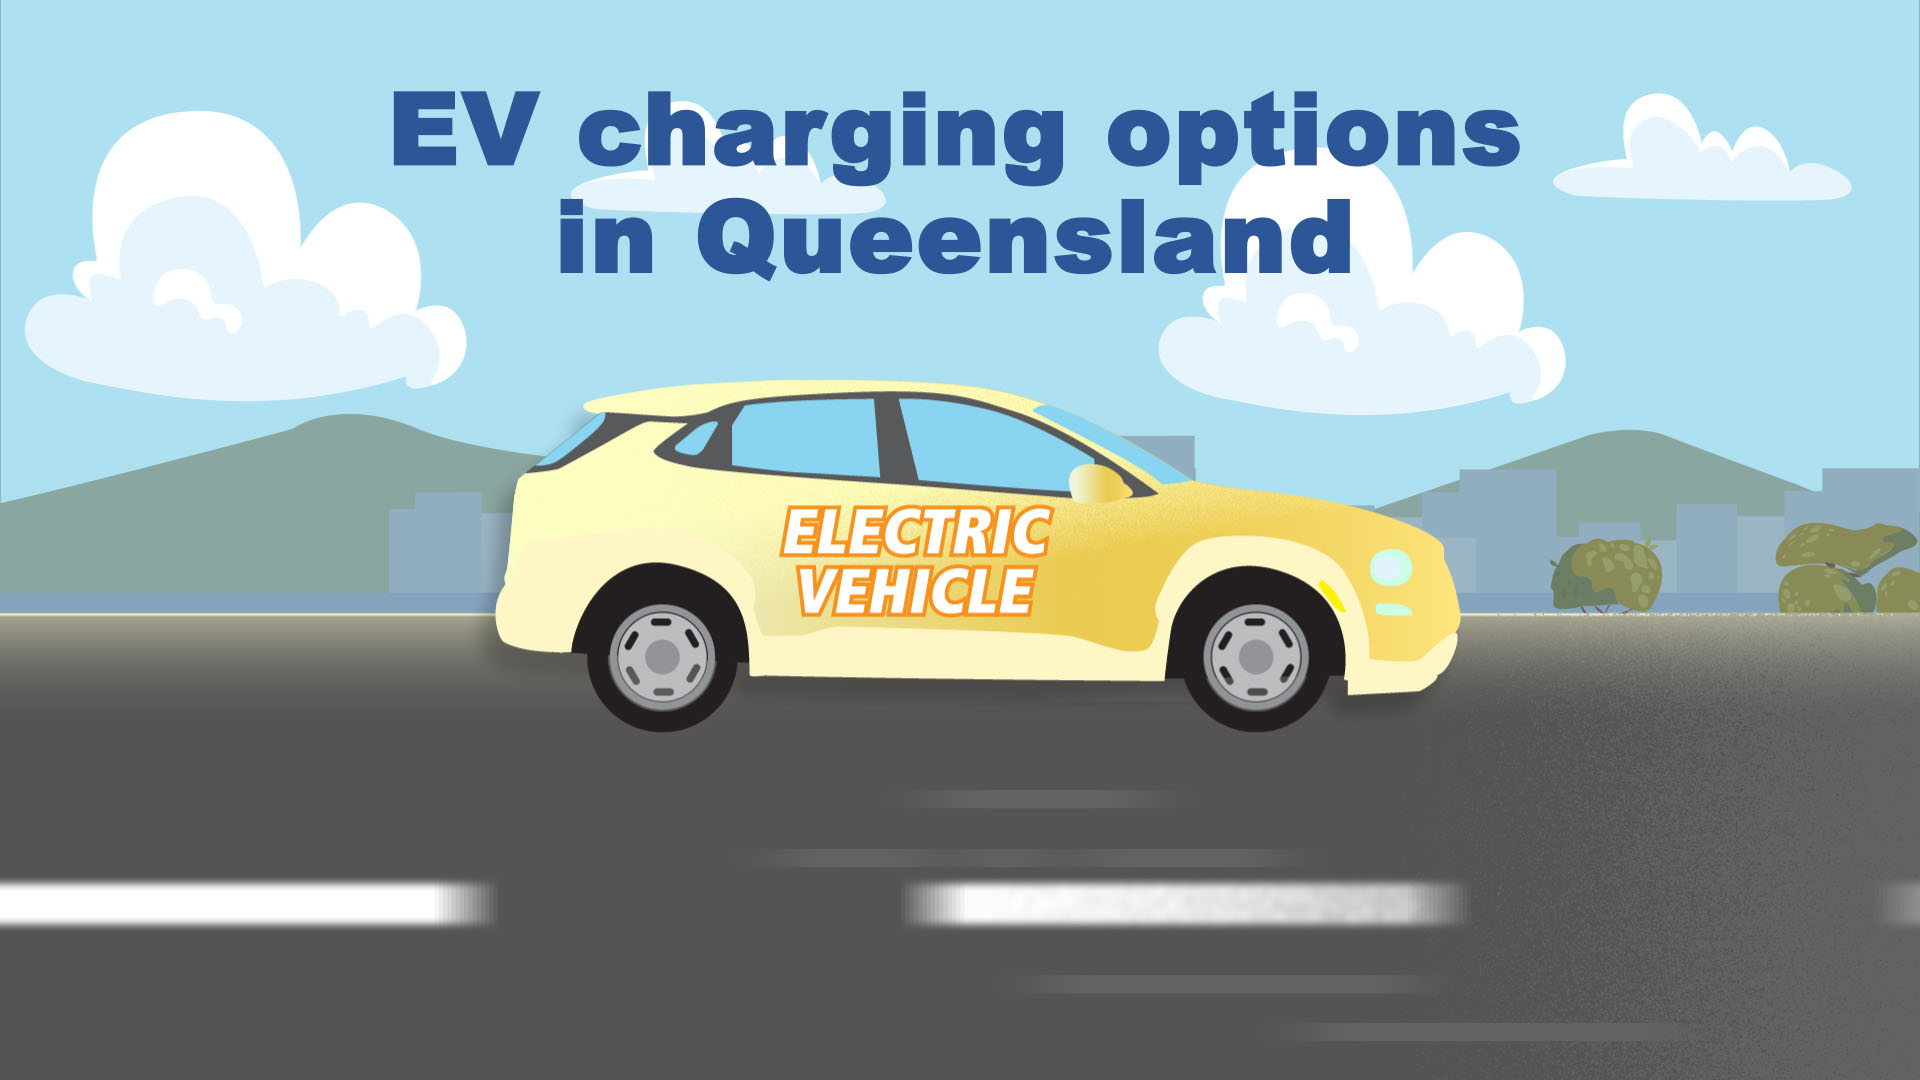 Animation of electric vehicle